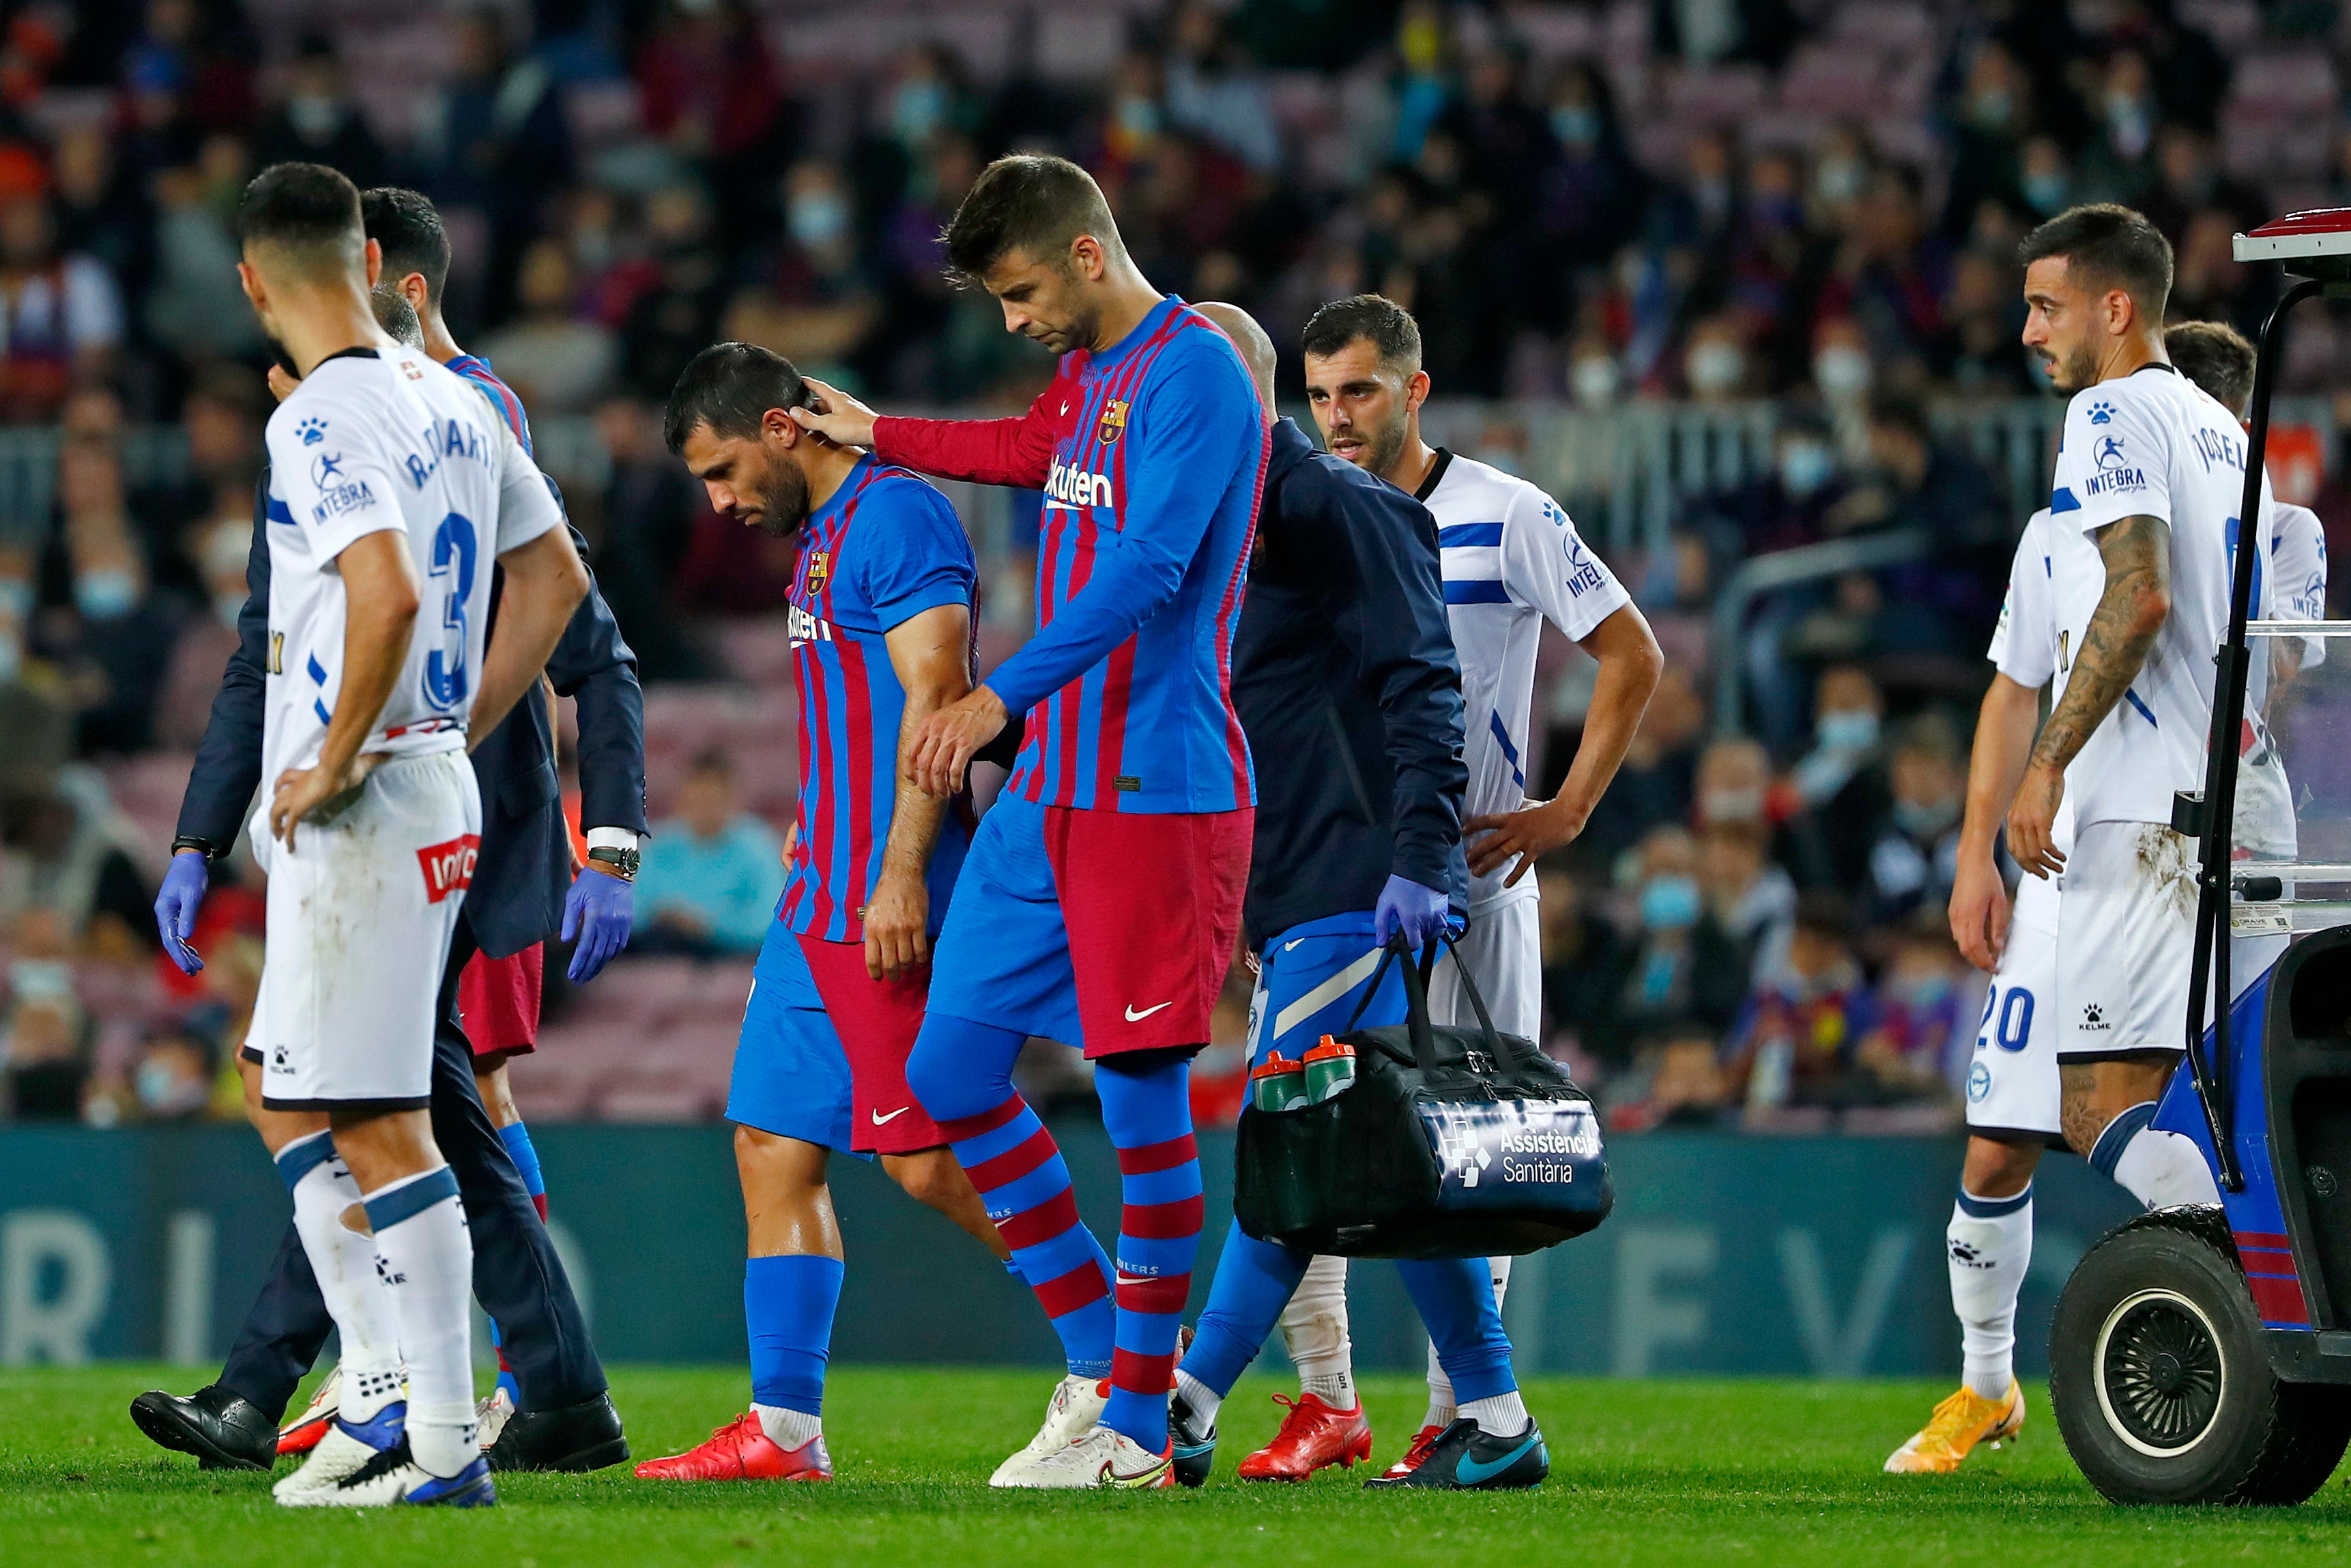 Barcelona’s Sergio Aguero, second left, lasted less than 45 minutes against Alaves (Joan Monfort/AP)